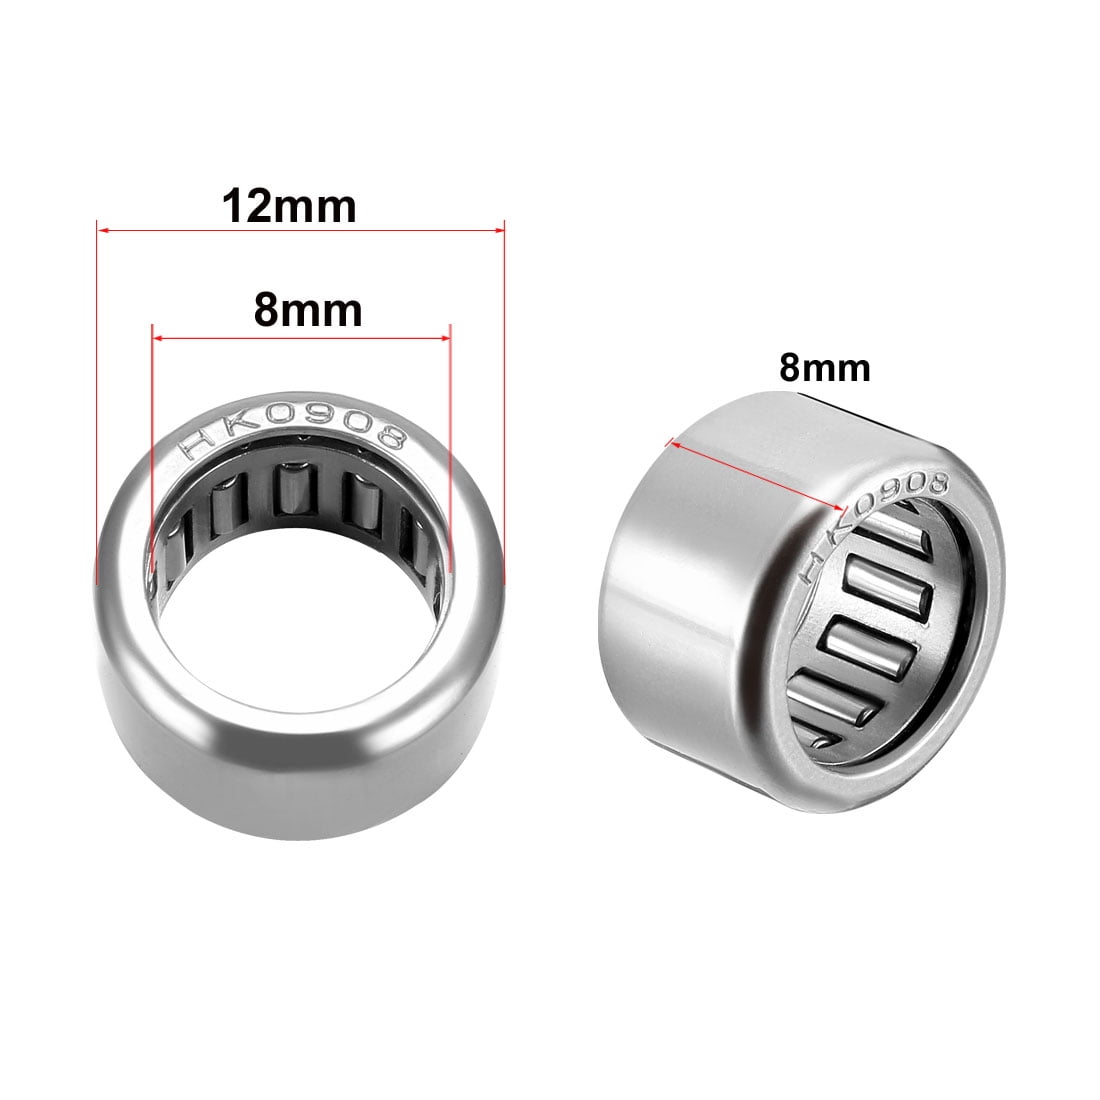 1 x HK0908 DRAWN CUP NEEDLE ROLLER BEARING ID 9mm OD 13mm LENGTH 8mm